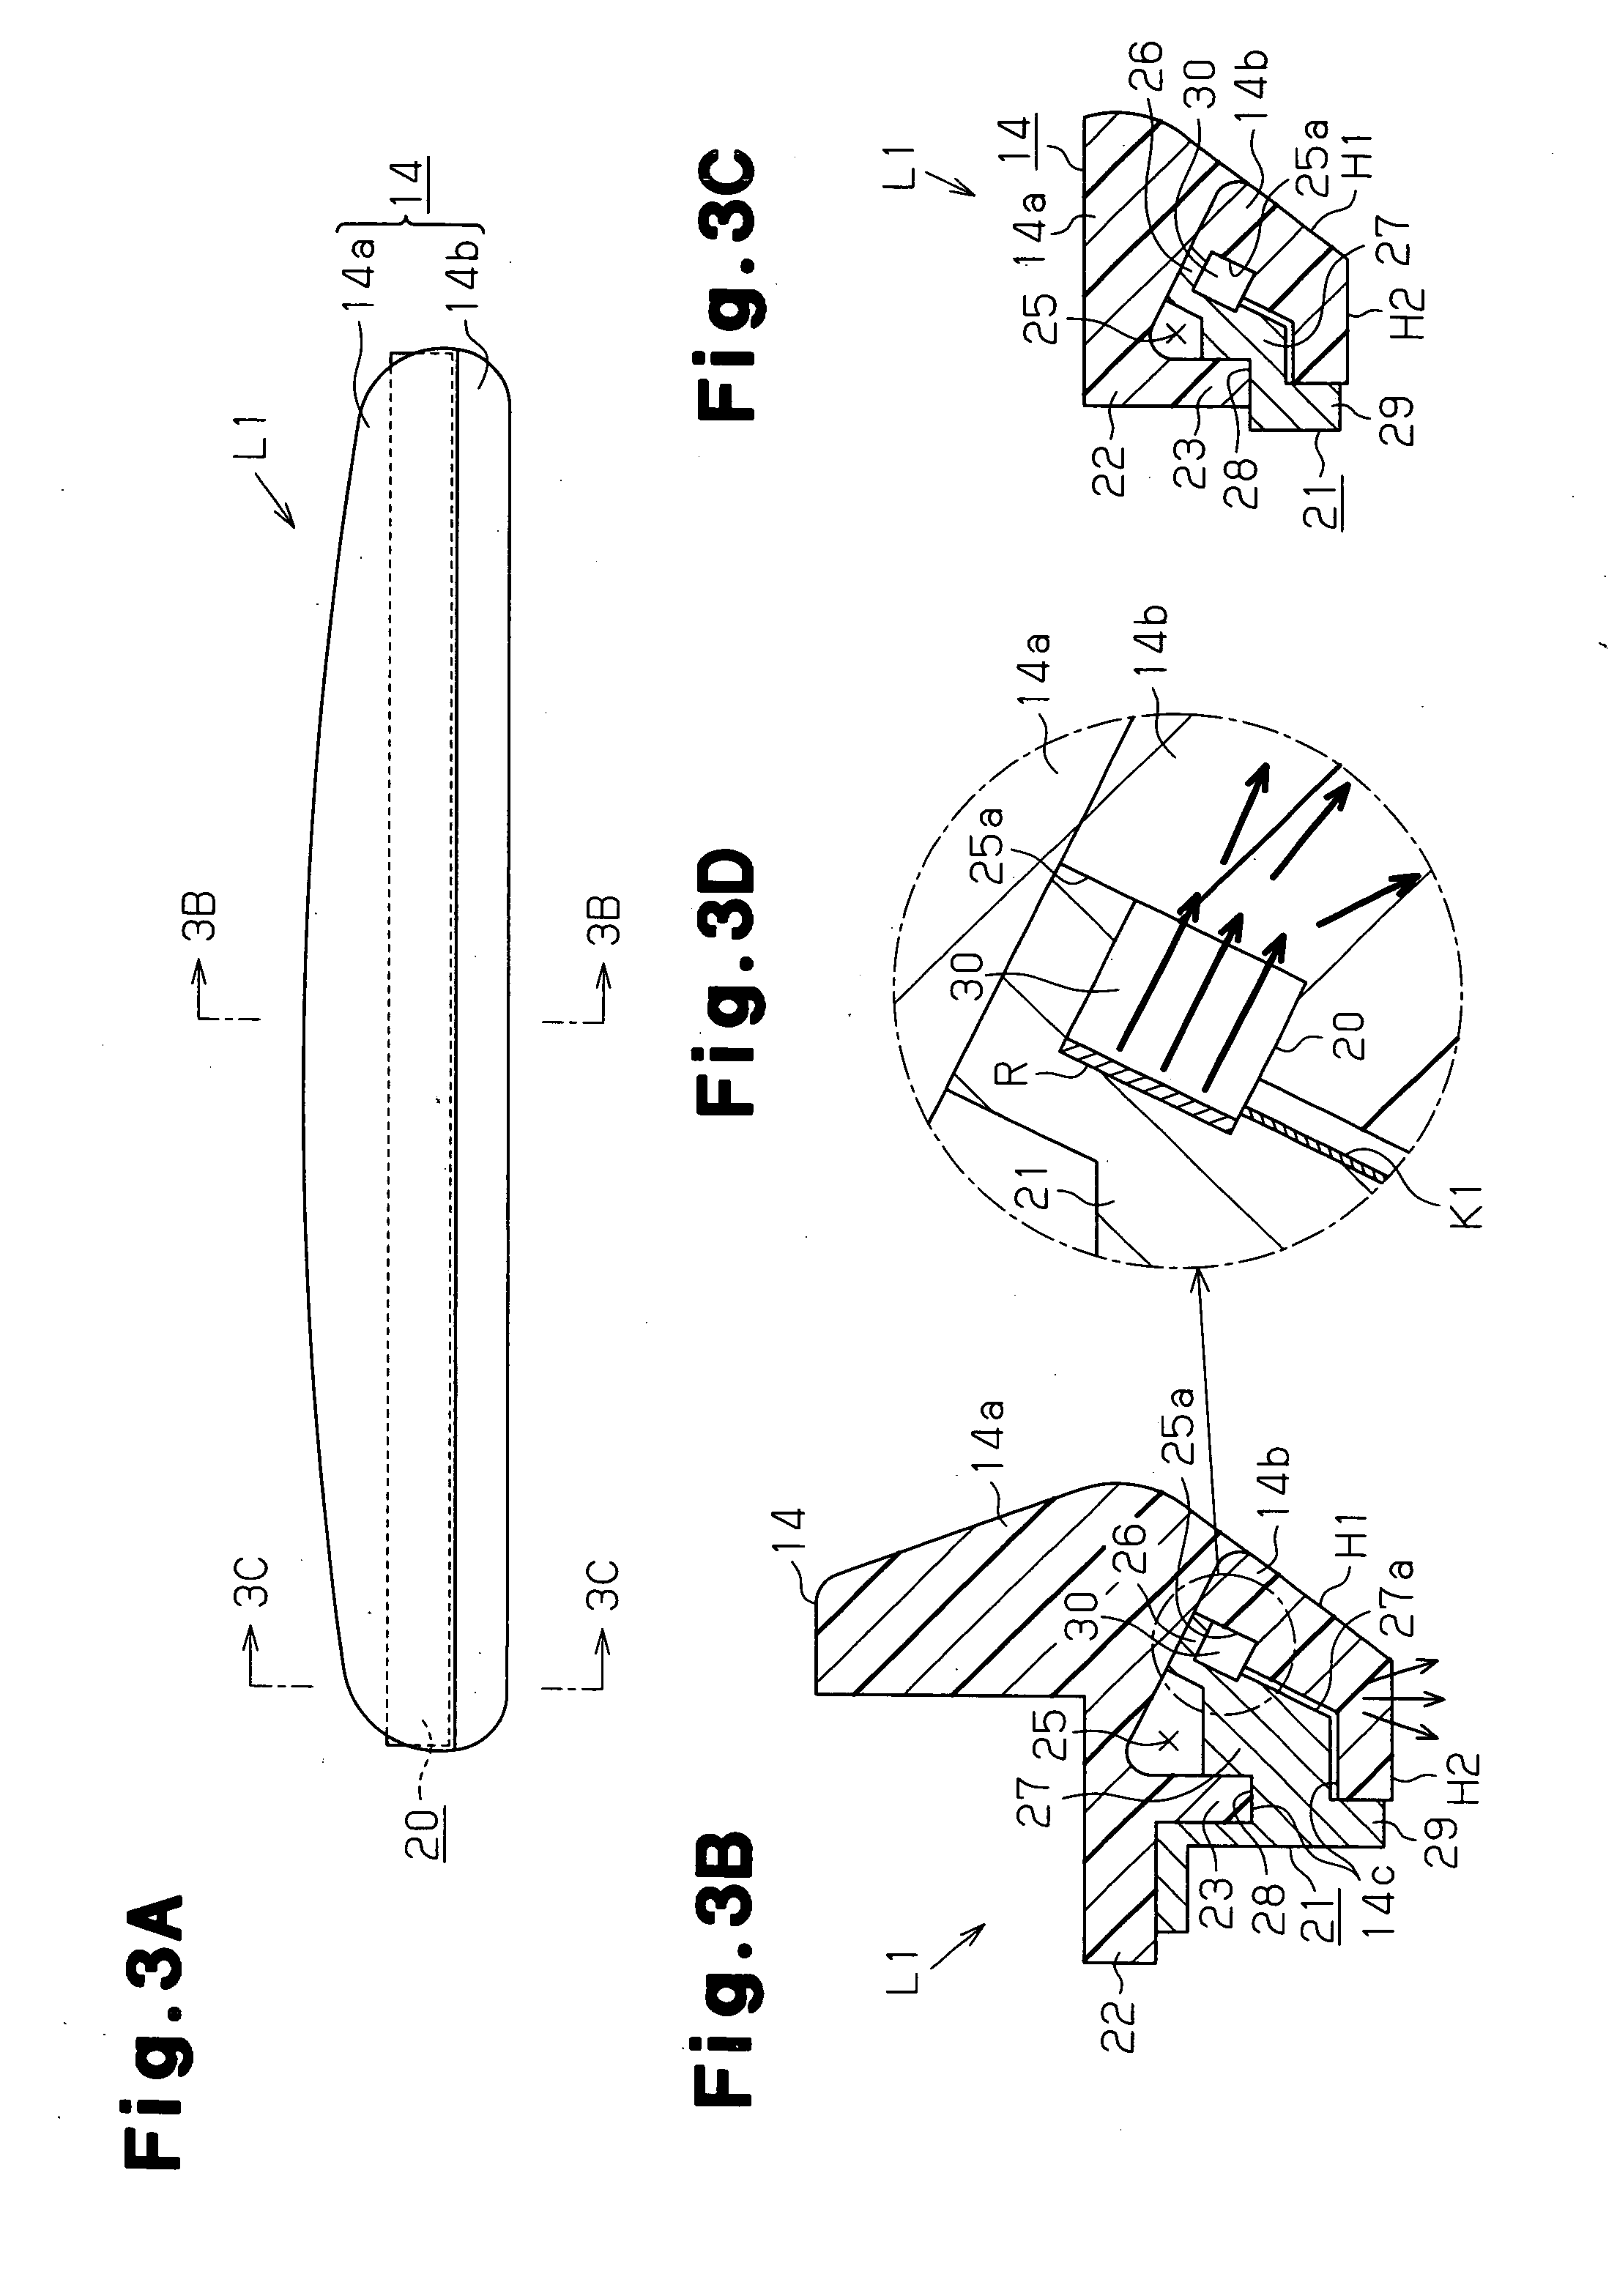 Lighting apparatus for vehicle